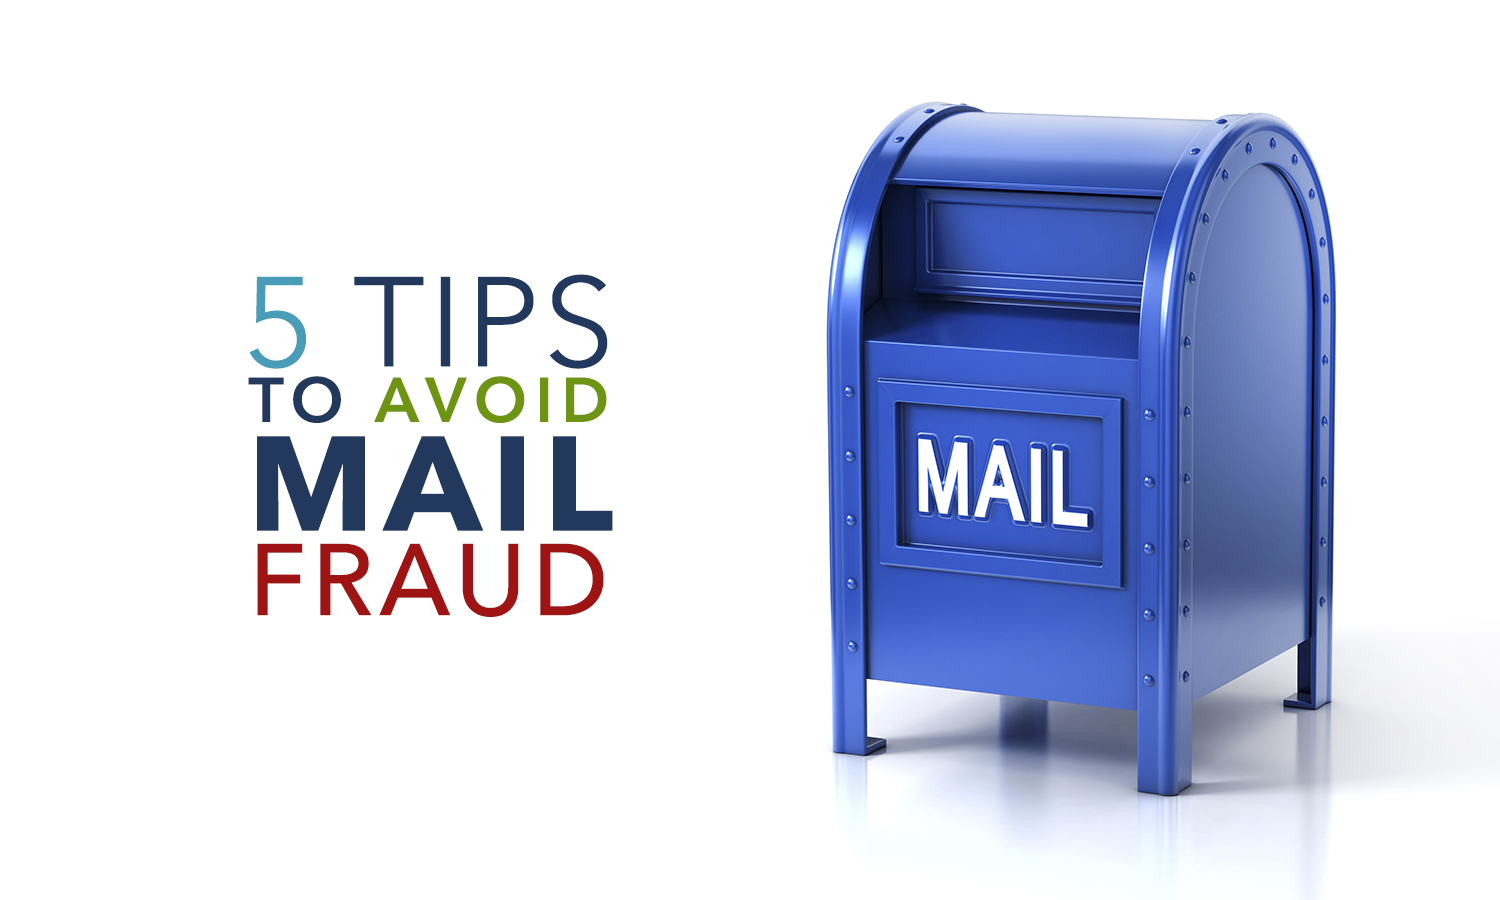 5 tips to avoid mail fraud